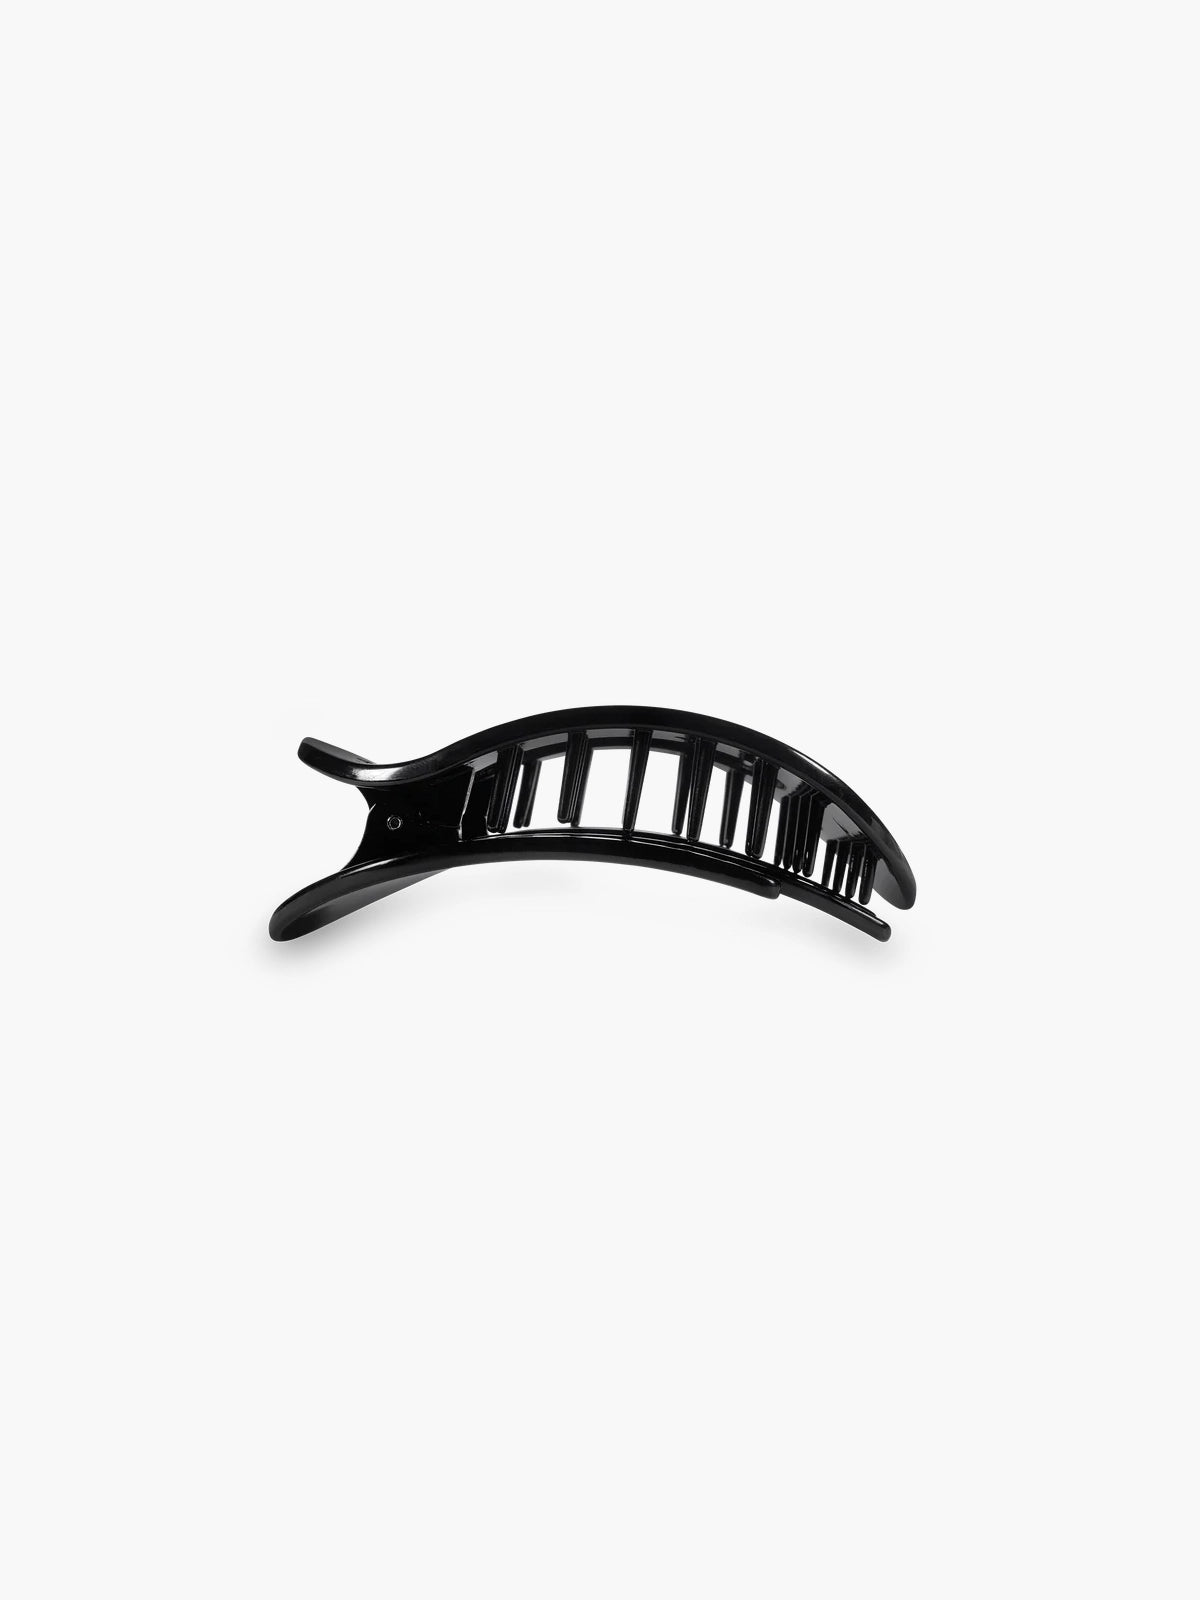 teleties small flat round hair clip in jet black